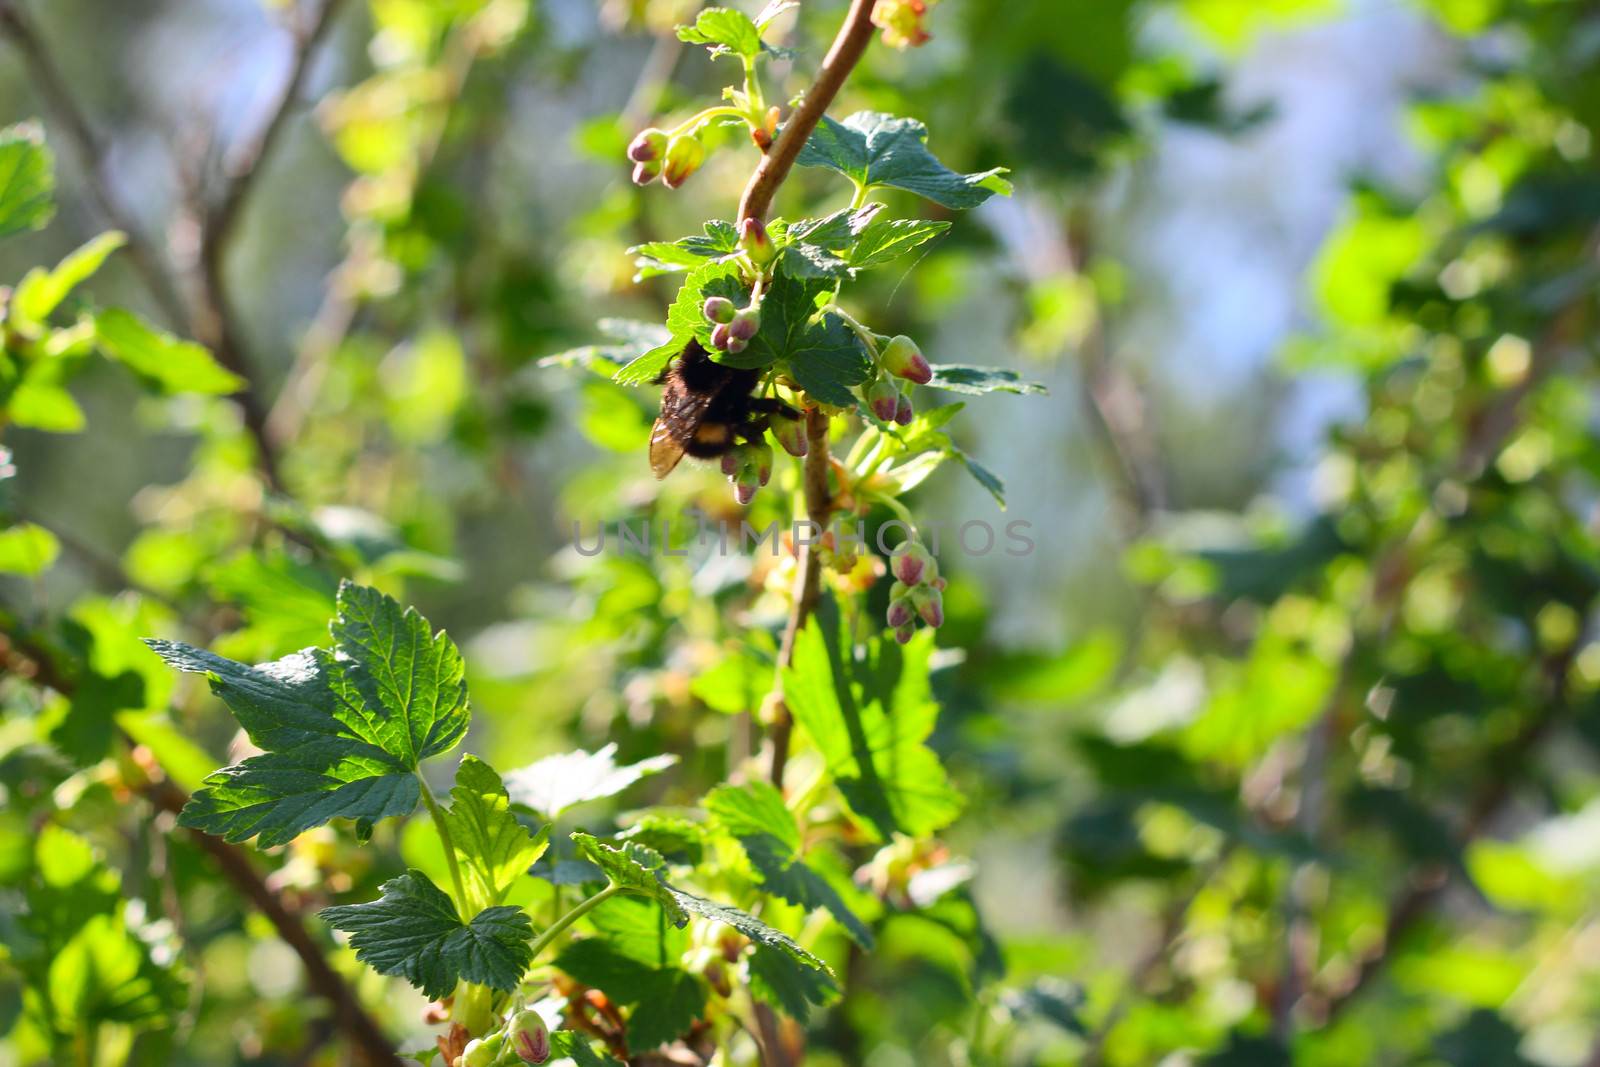 Big bee on spring blooming currant bush